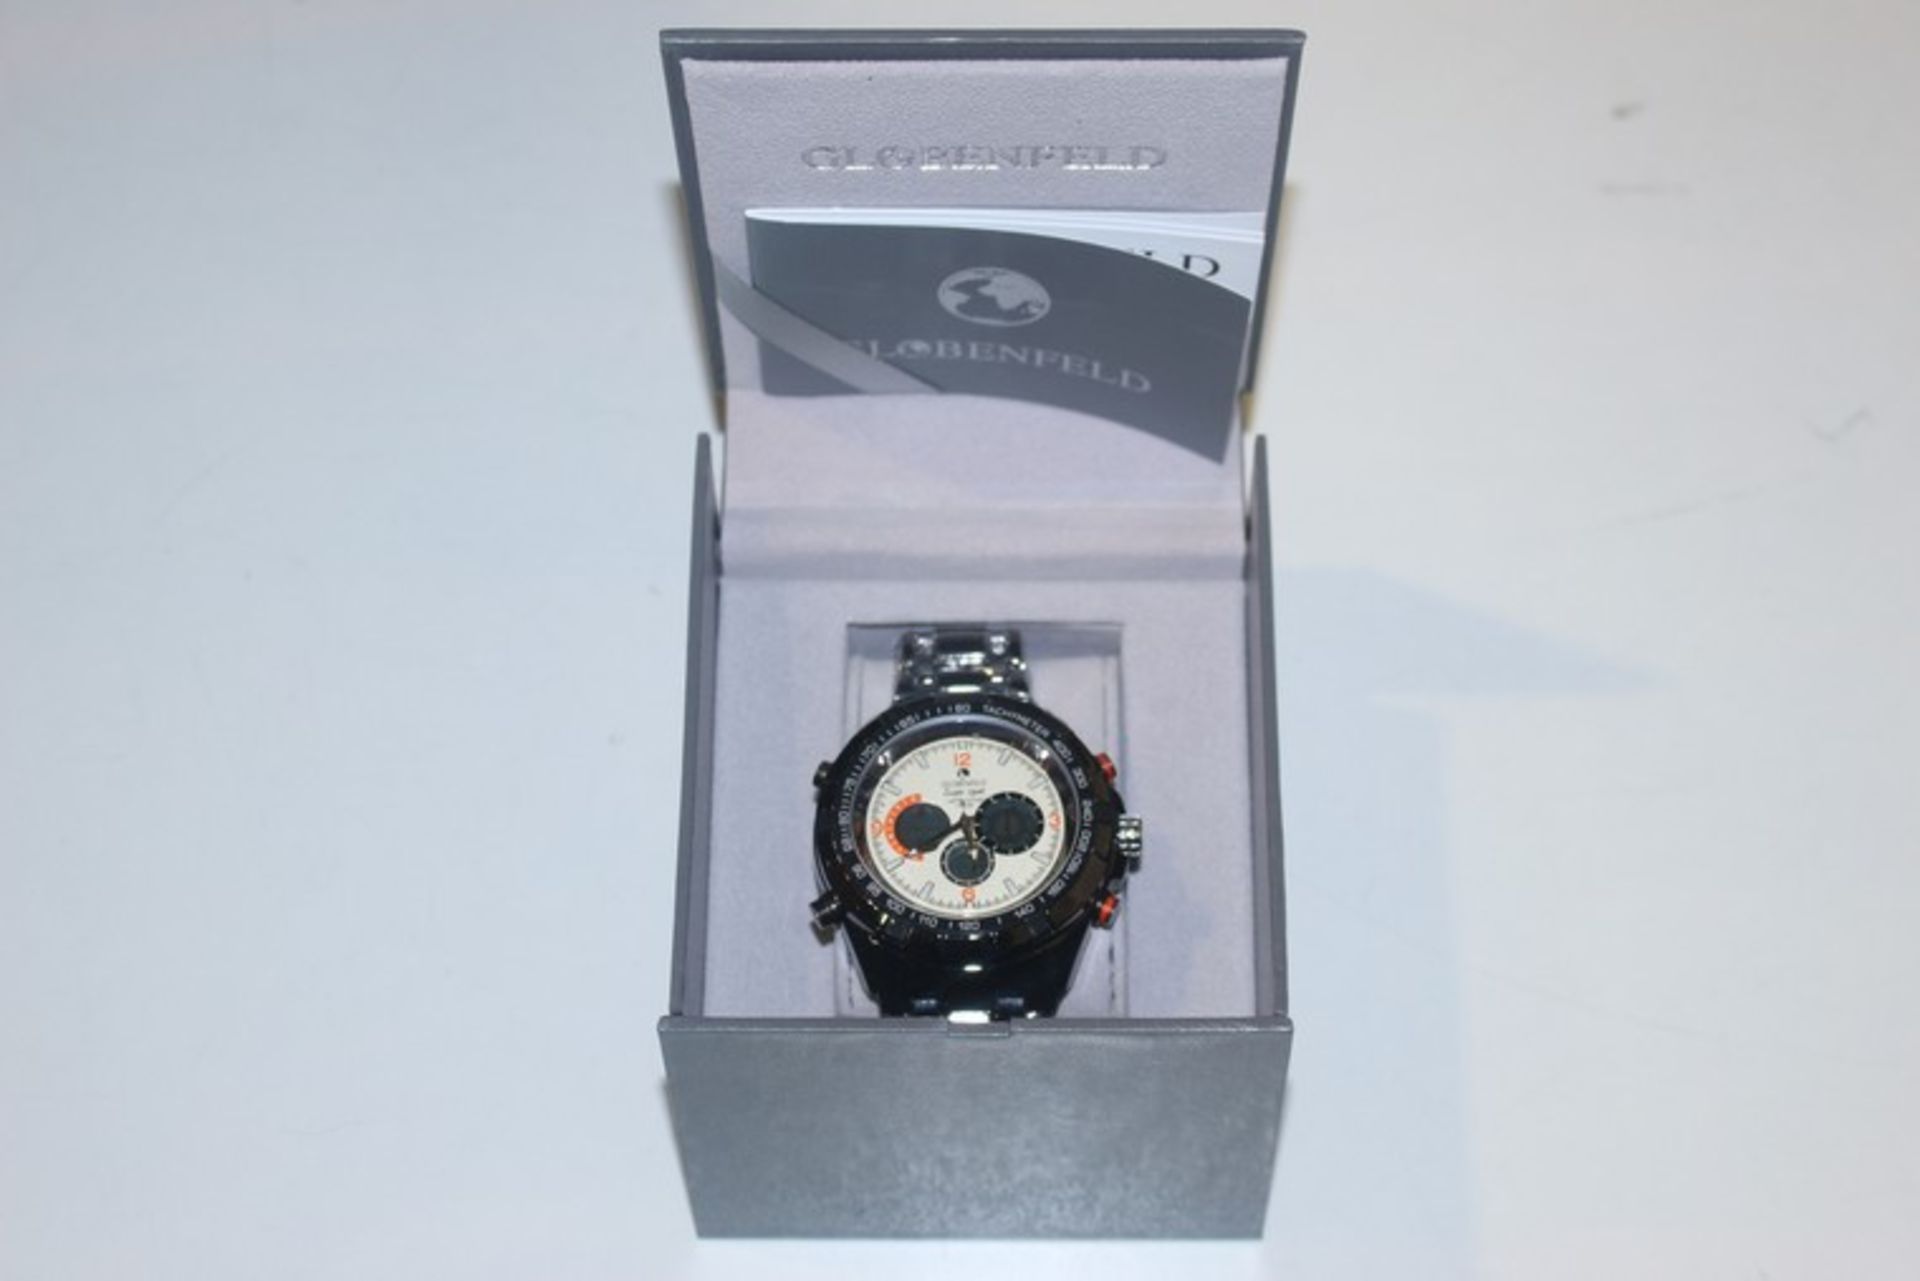 1 x BOXED BRAND NEW GLOBENFIELD MENS DESIGNER WRIST WATCH RRP £400 *PLEASE NOTE THAT THE BID PRICE